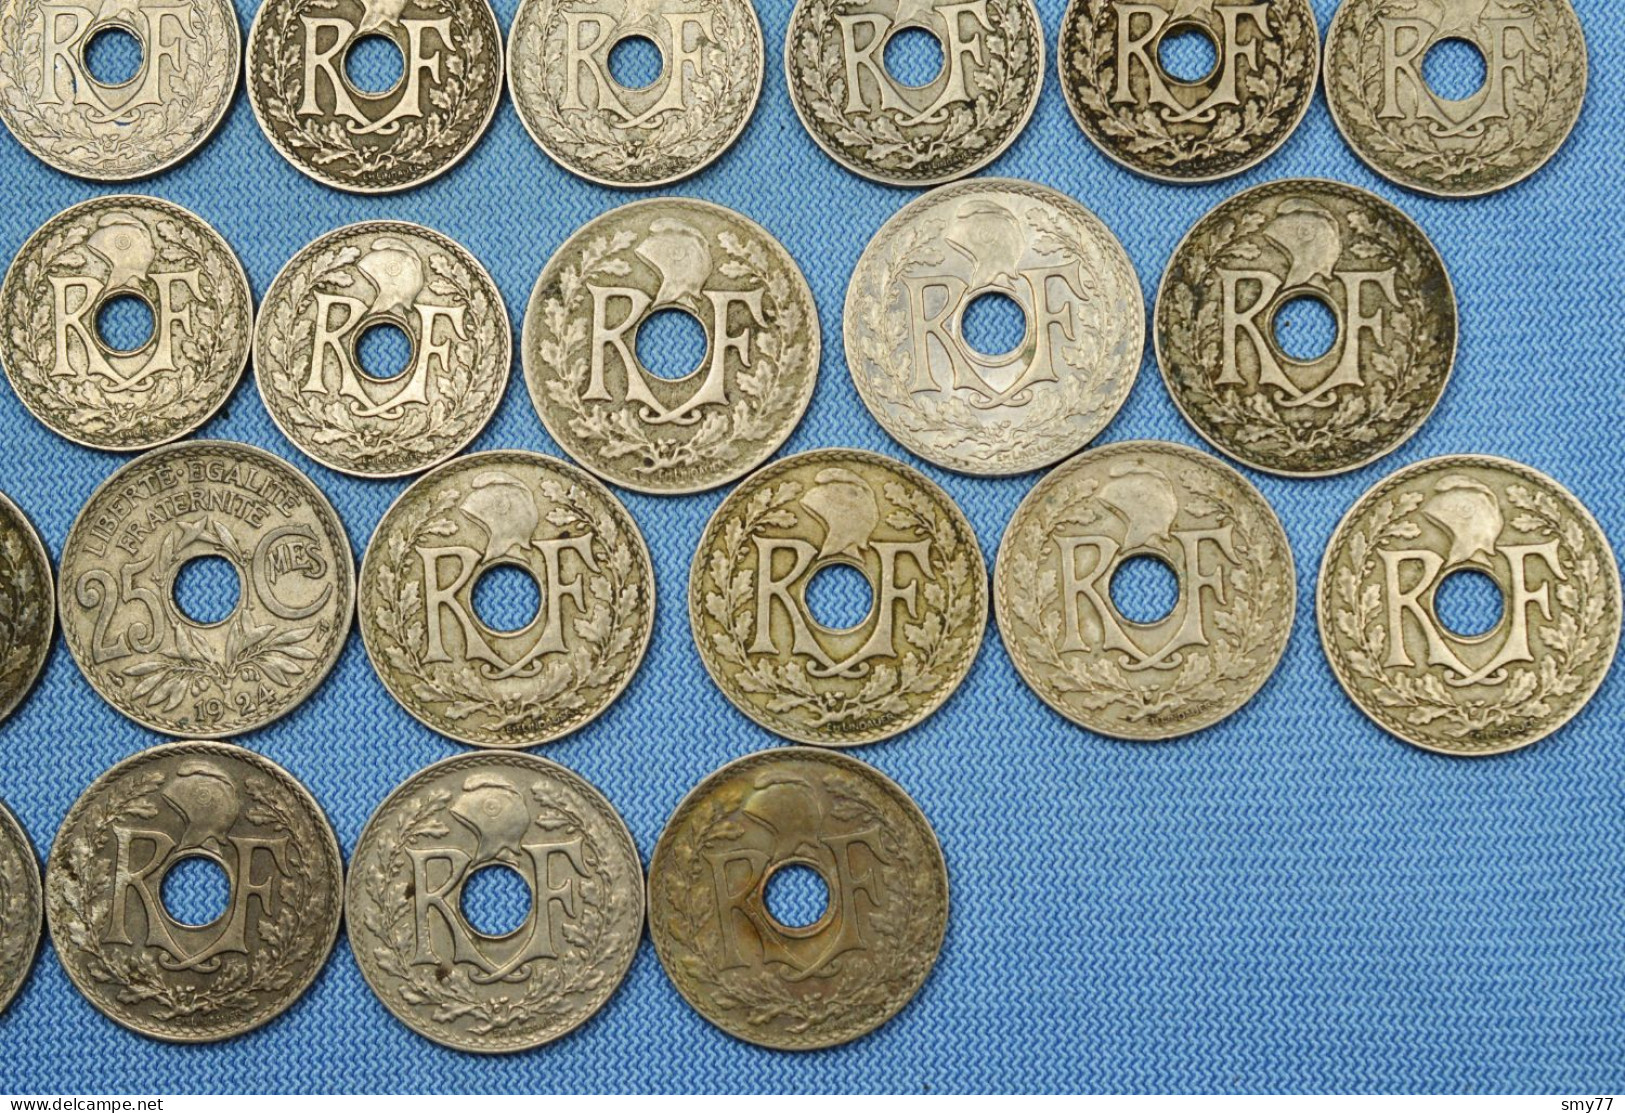 France • Lot Lindauer 62x • All different • 5 10 25 centimes • See details and pictures • mostly in high grade • [24-680